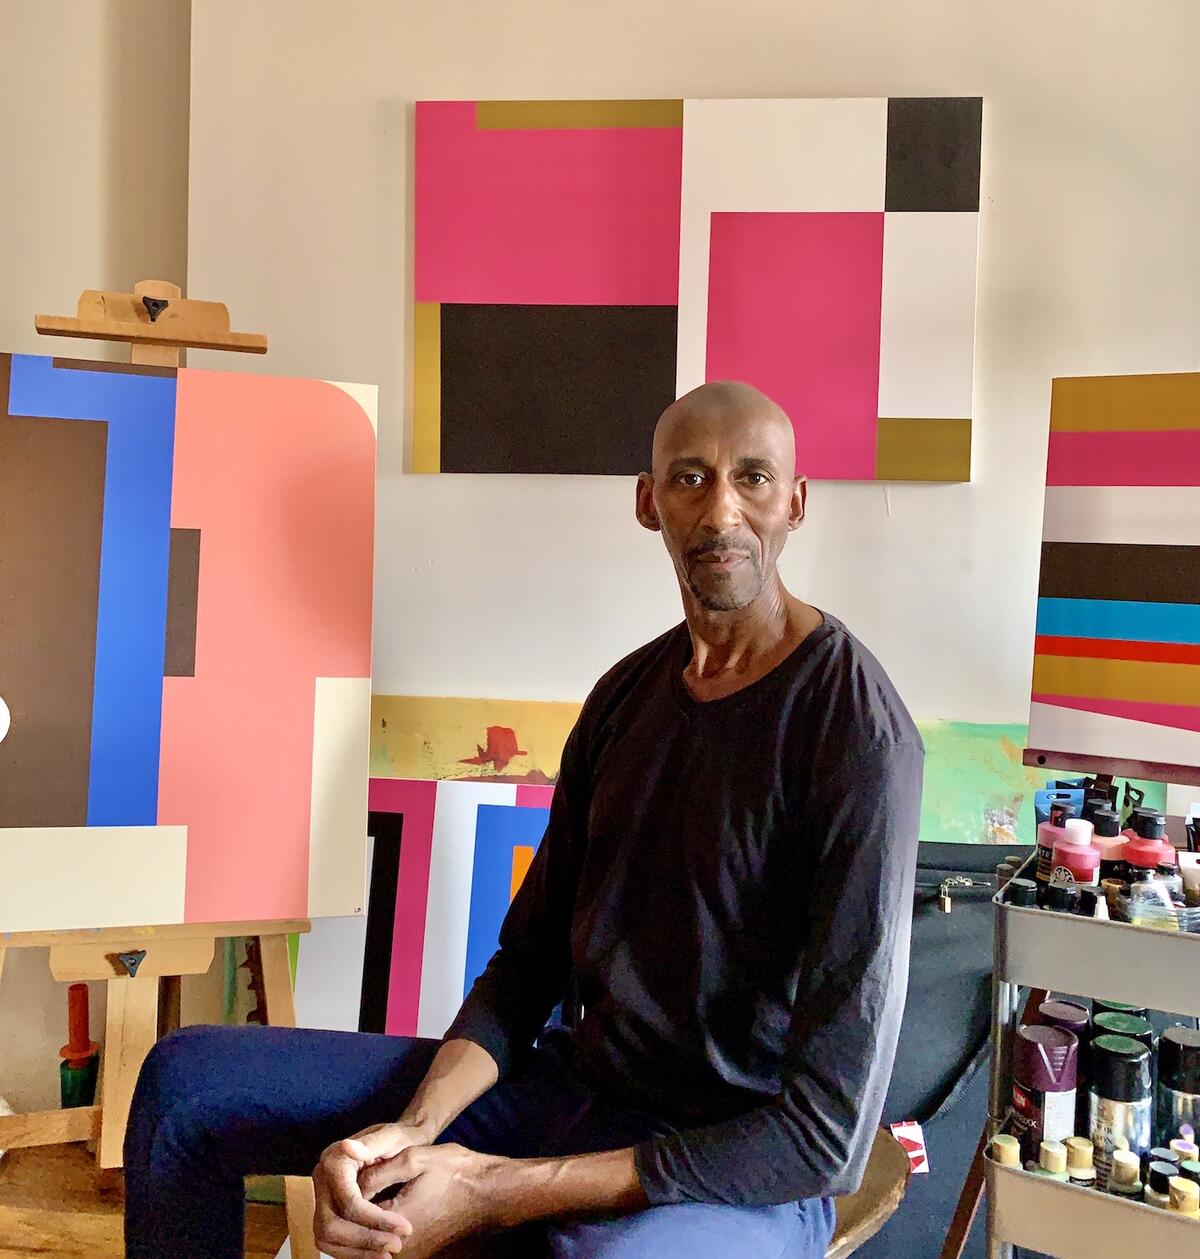 This self-taught artist wants to work with more interior designers